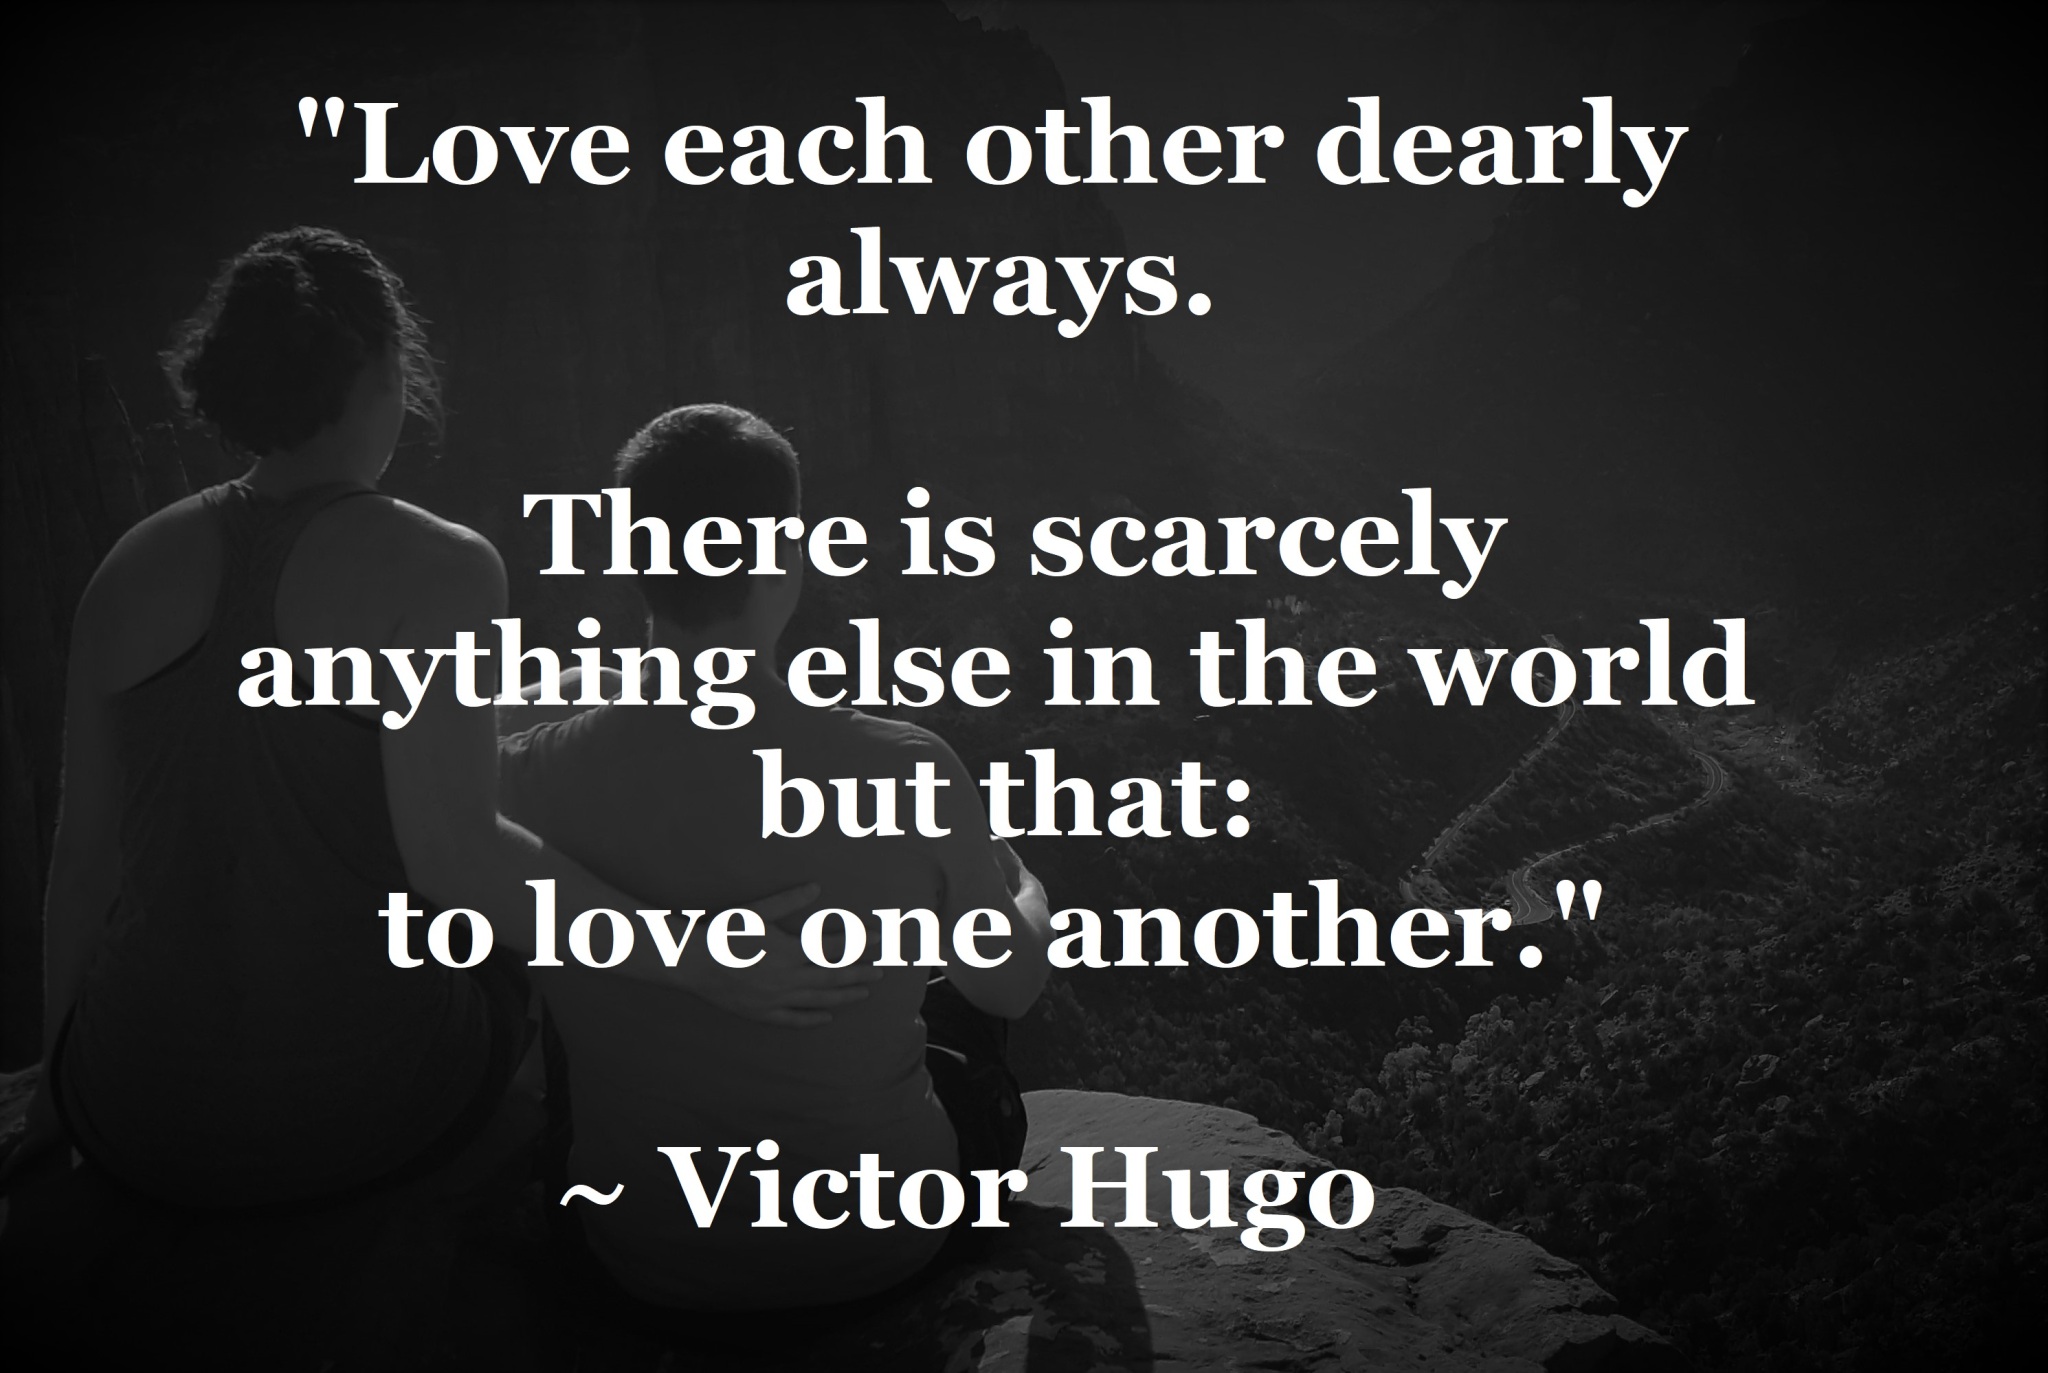 Victor Hugo - nothing in the world but to love